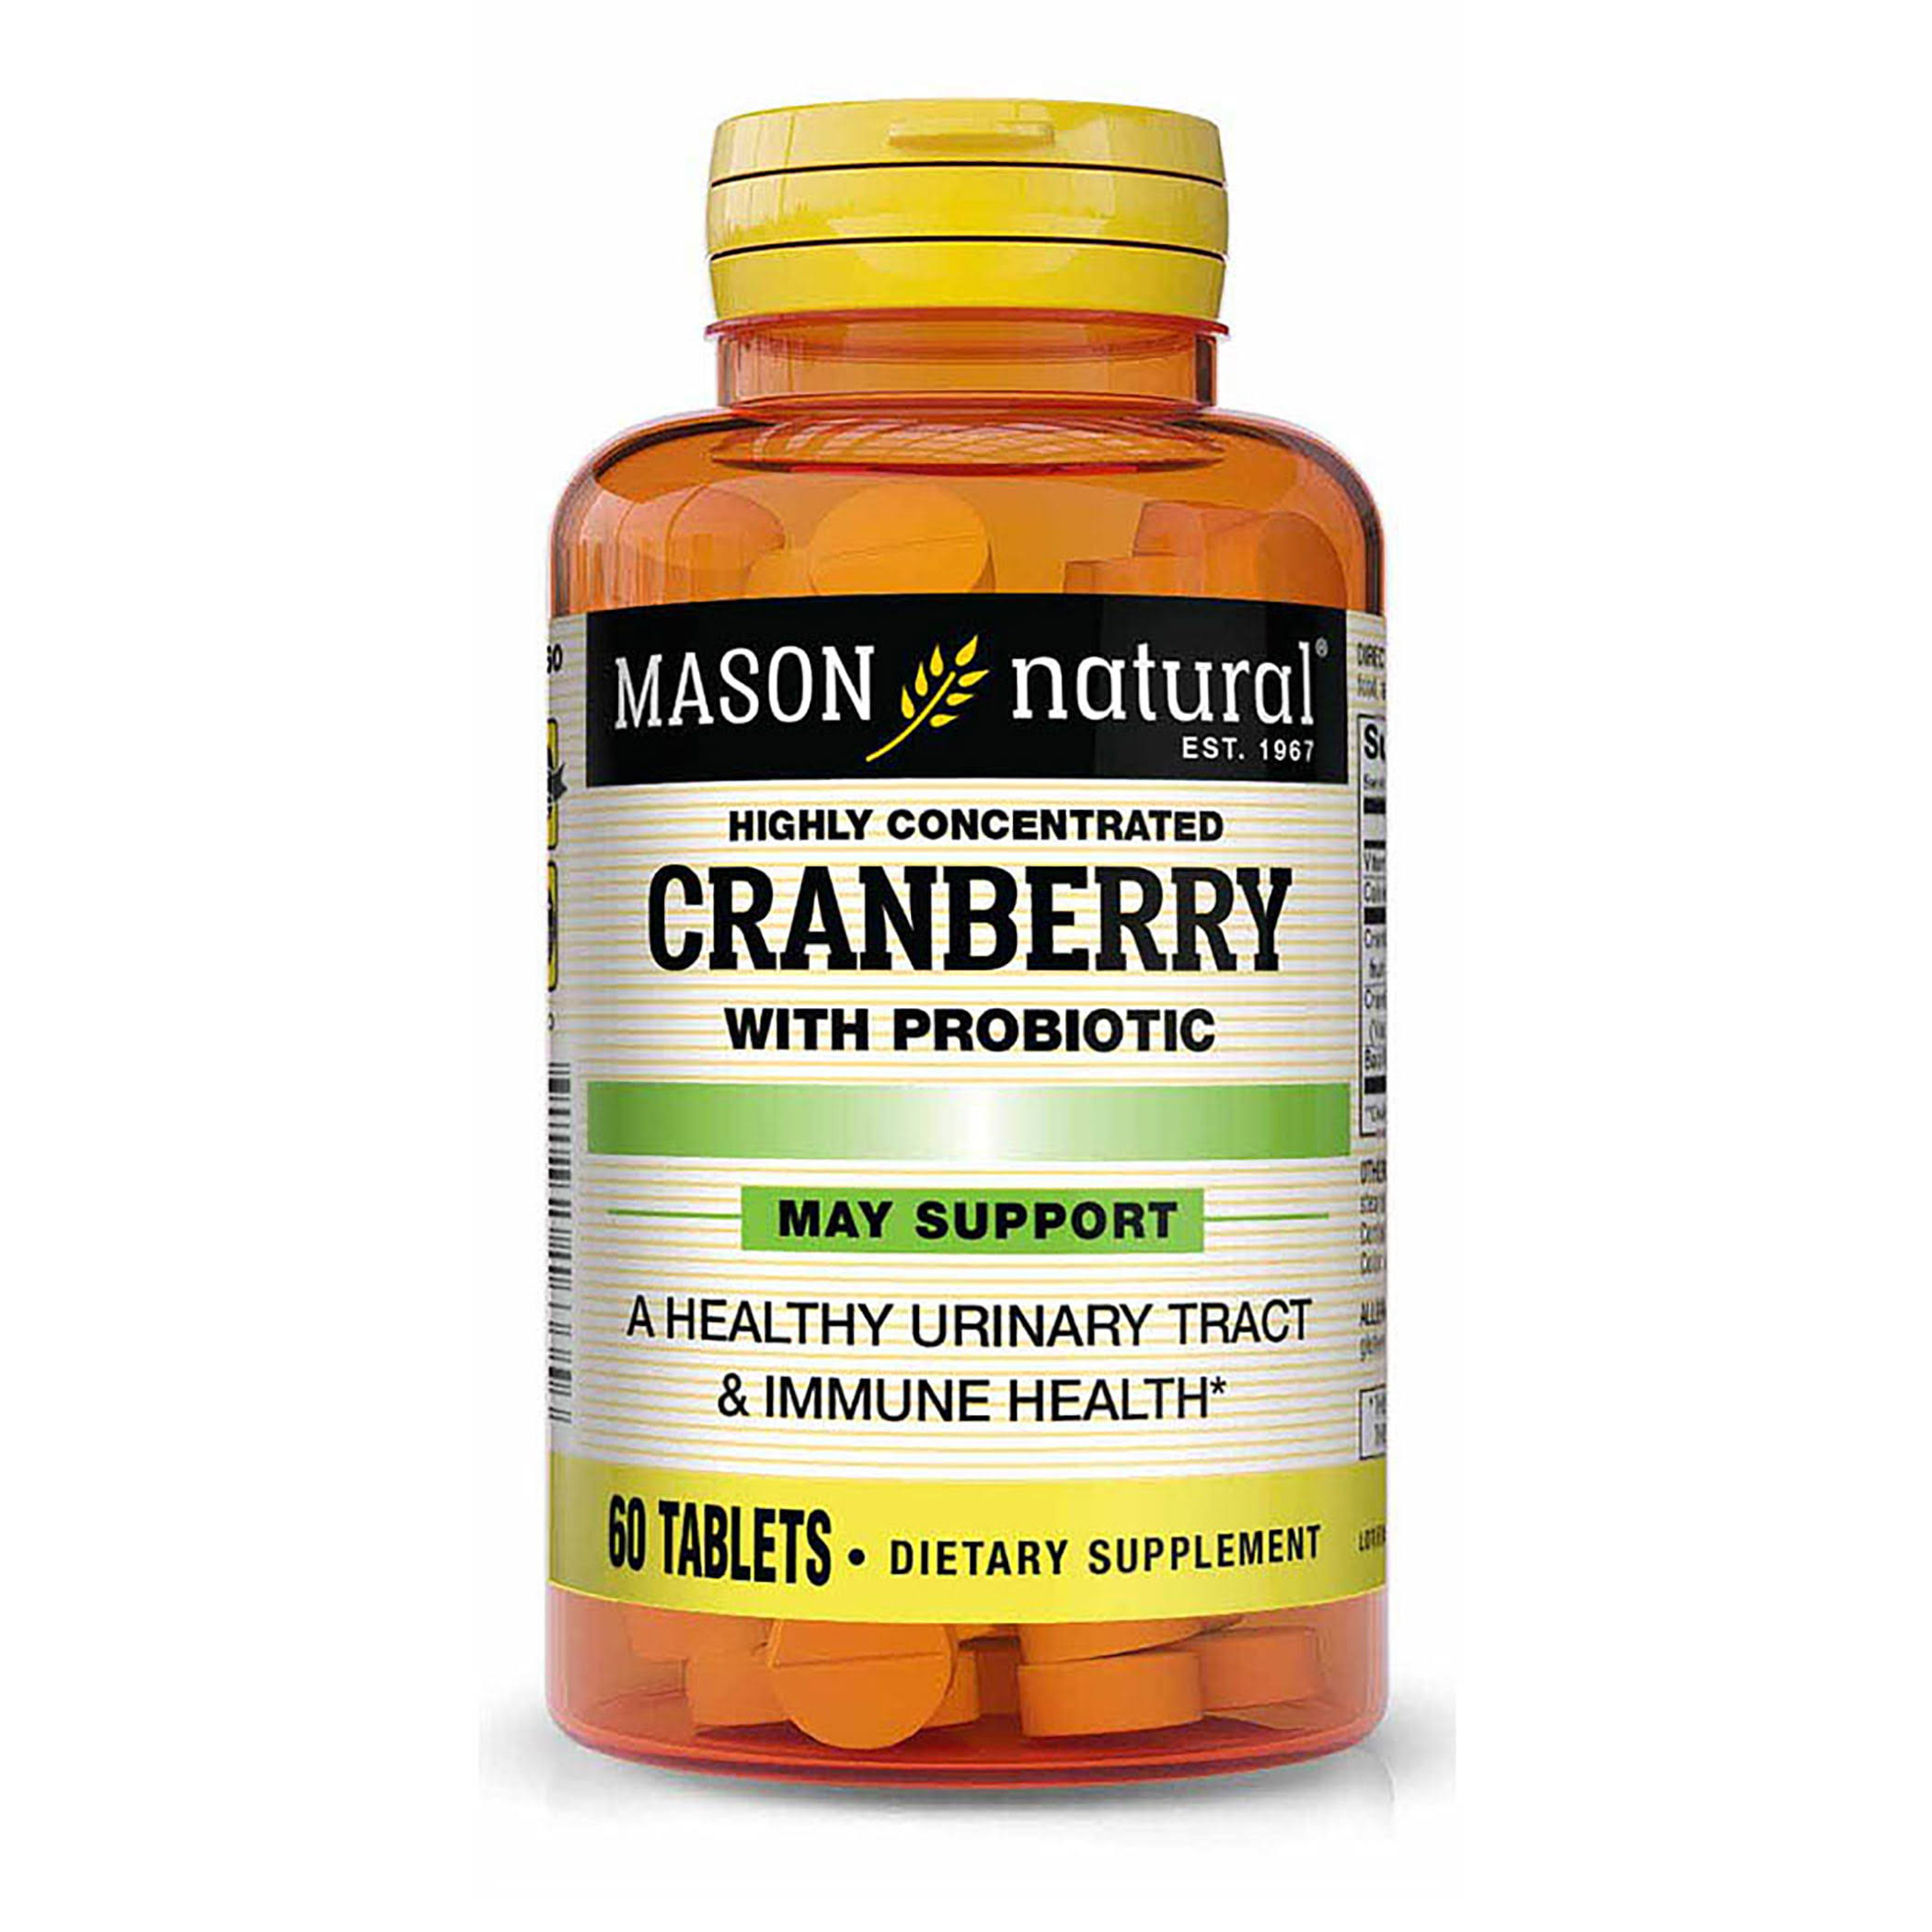 Mason Natural Highly Concentrated Cranberry with Probiotic Supplement - 60 Tablets